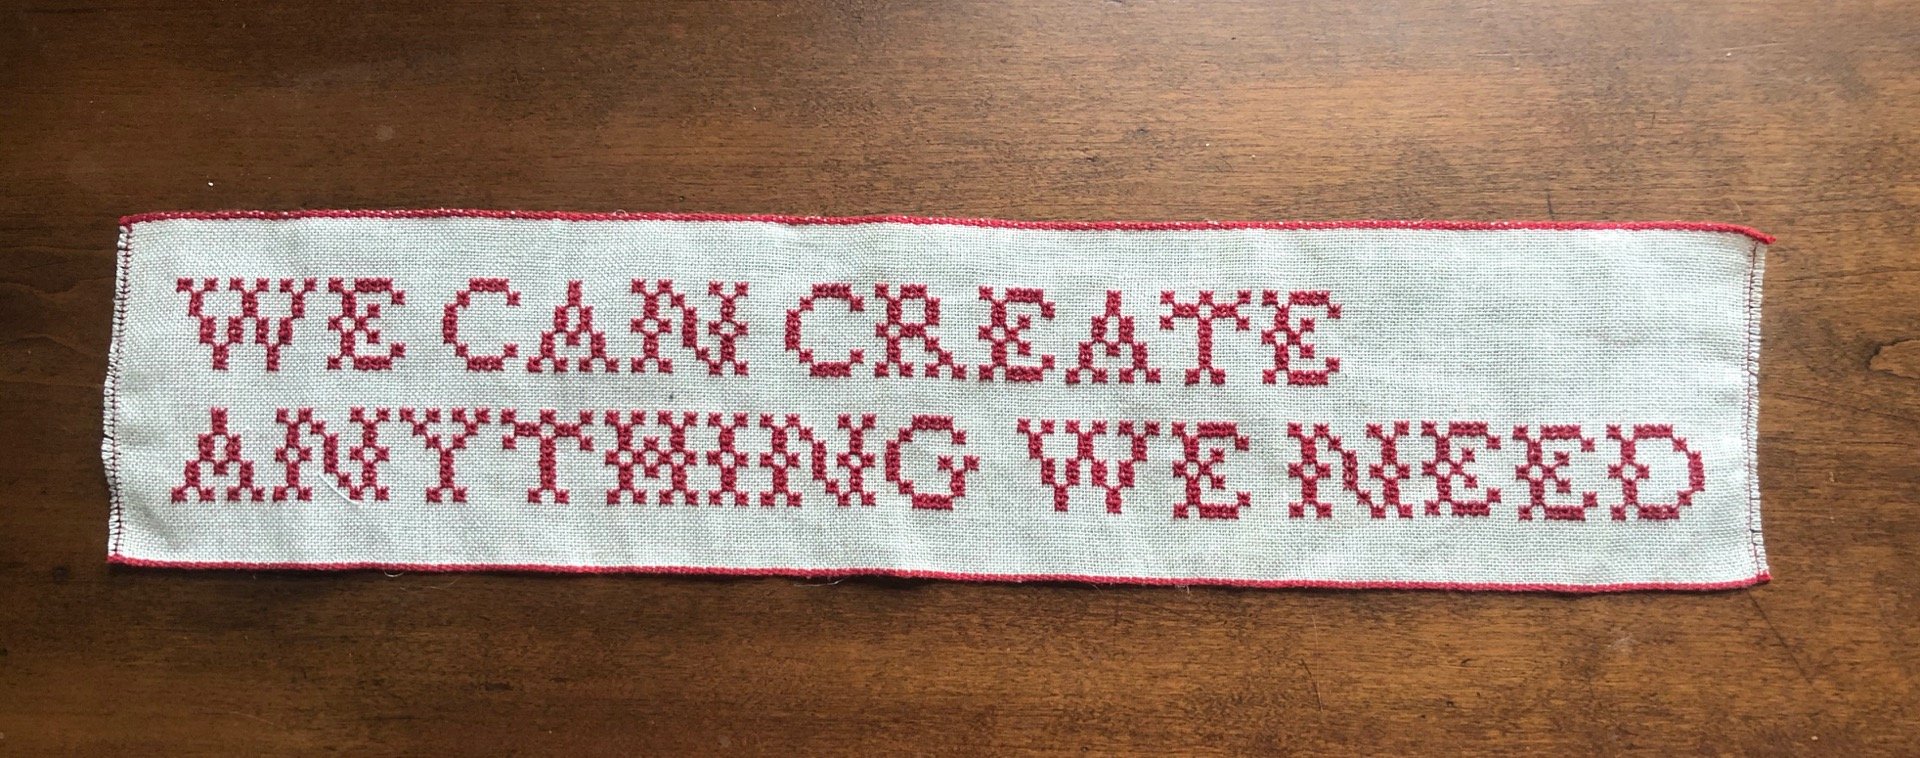   Banner , 2020. Cotton on linen. Stitched with reversible eyelets. 